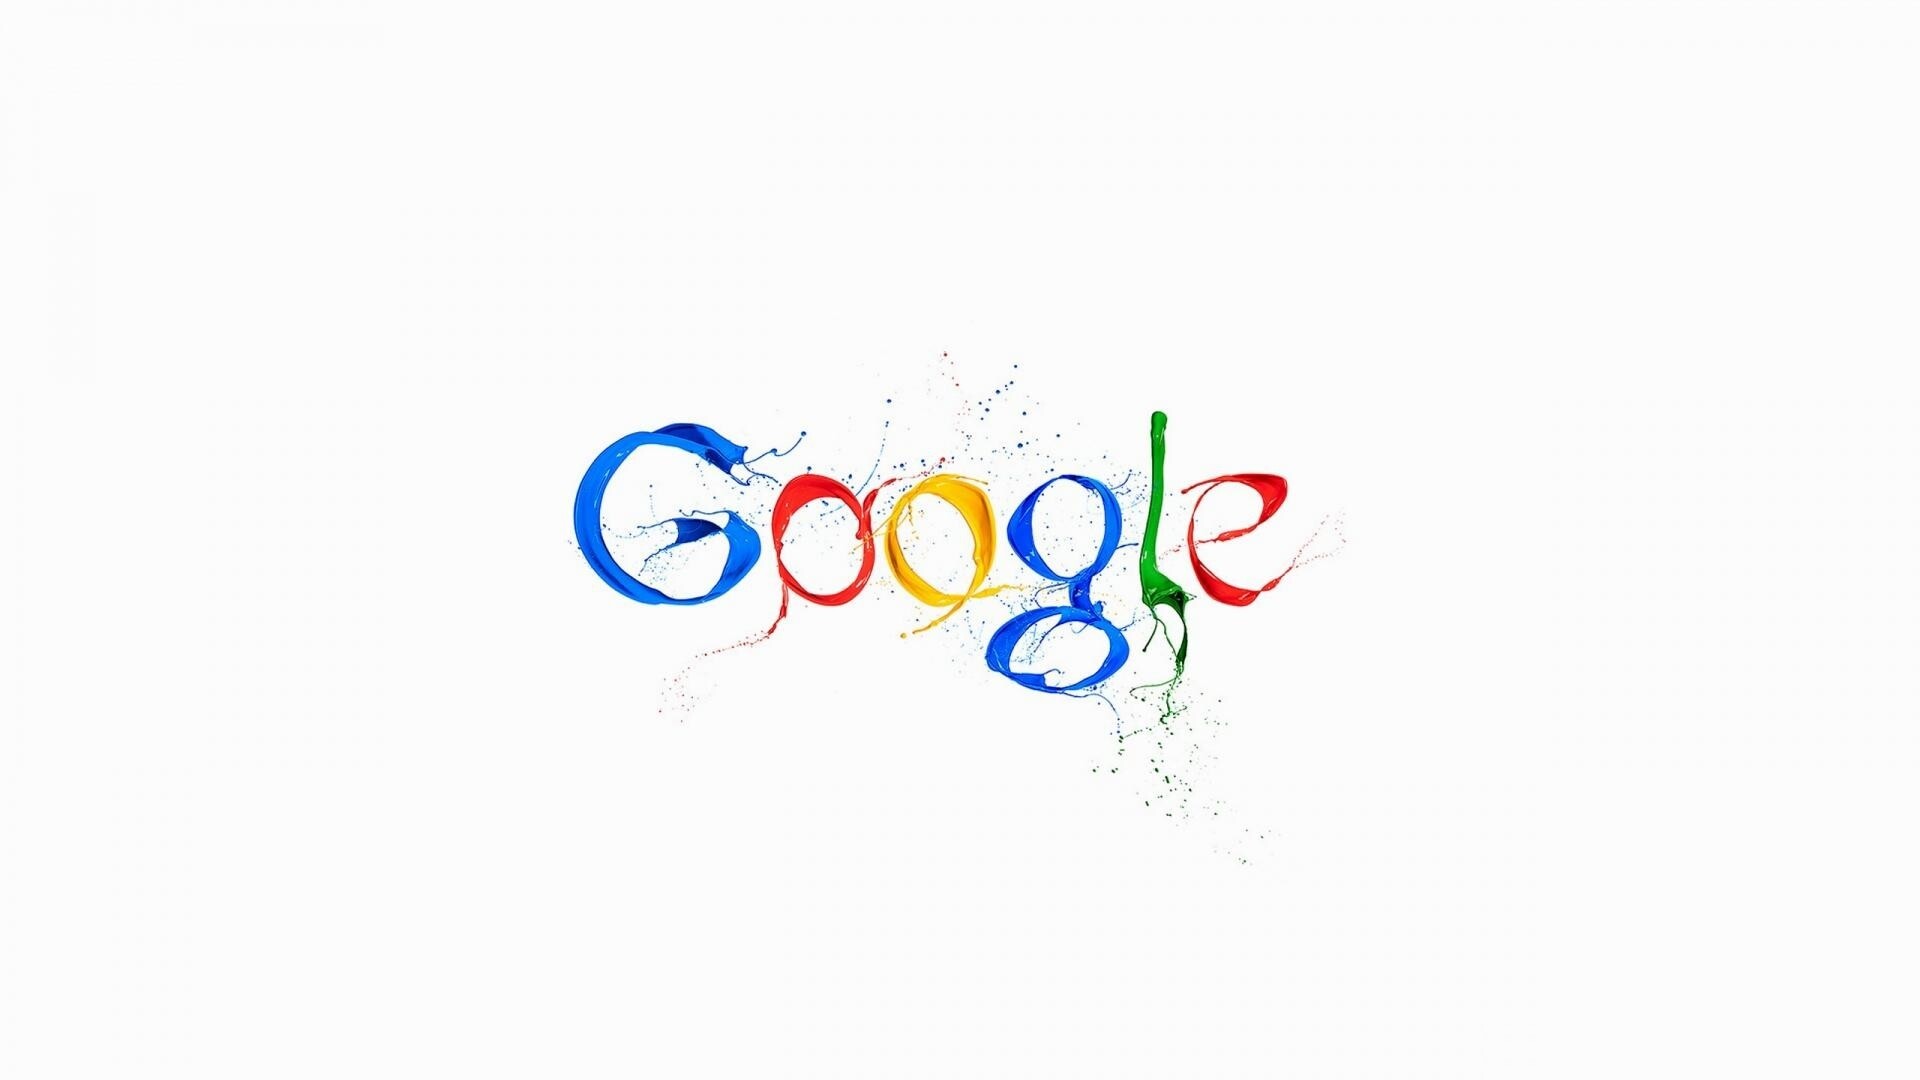 Google: The company was founded on September 4, 1998, by Larry Page and Sergey Brin. 1920x1080 Full HD Wallpaper.